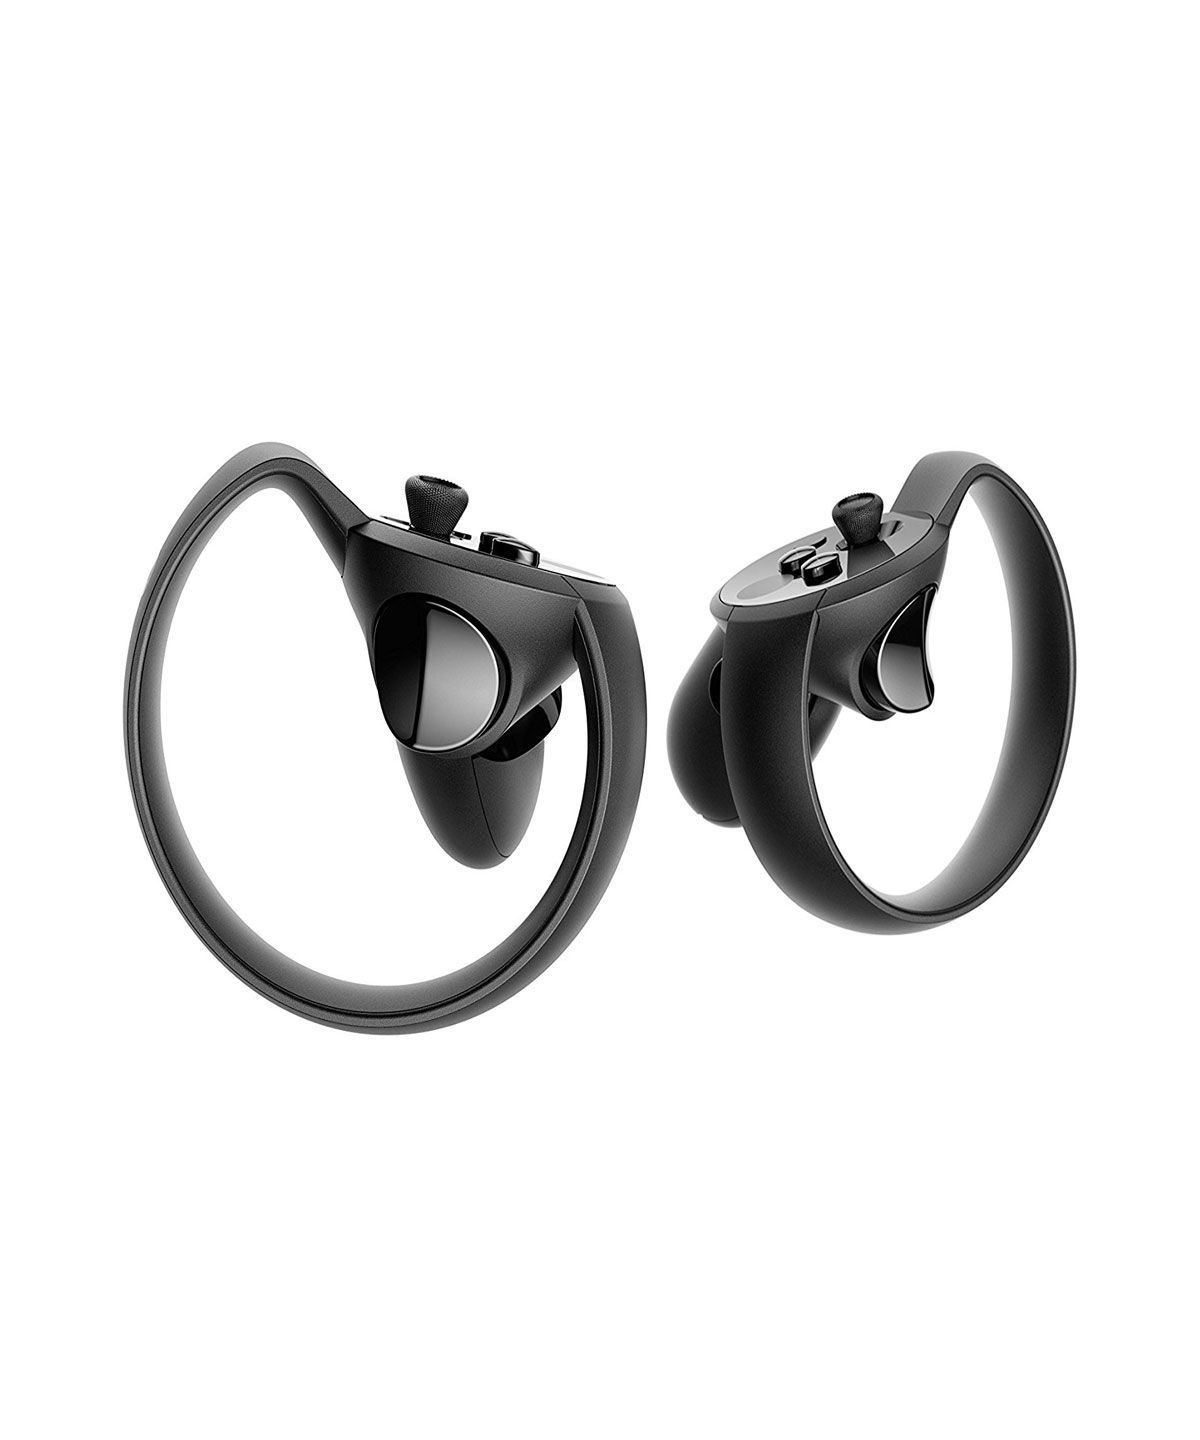 tay cam oculus touch